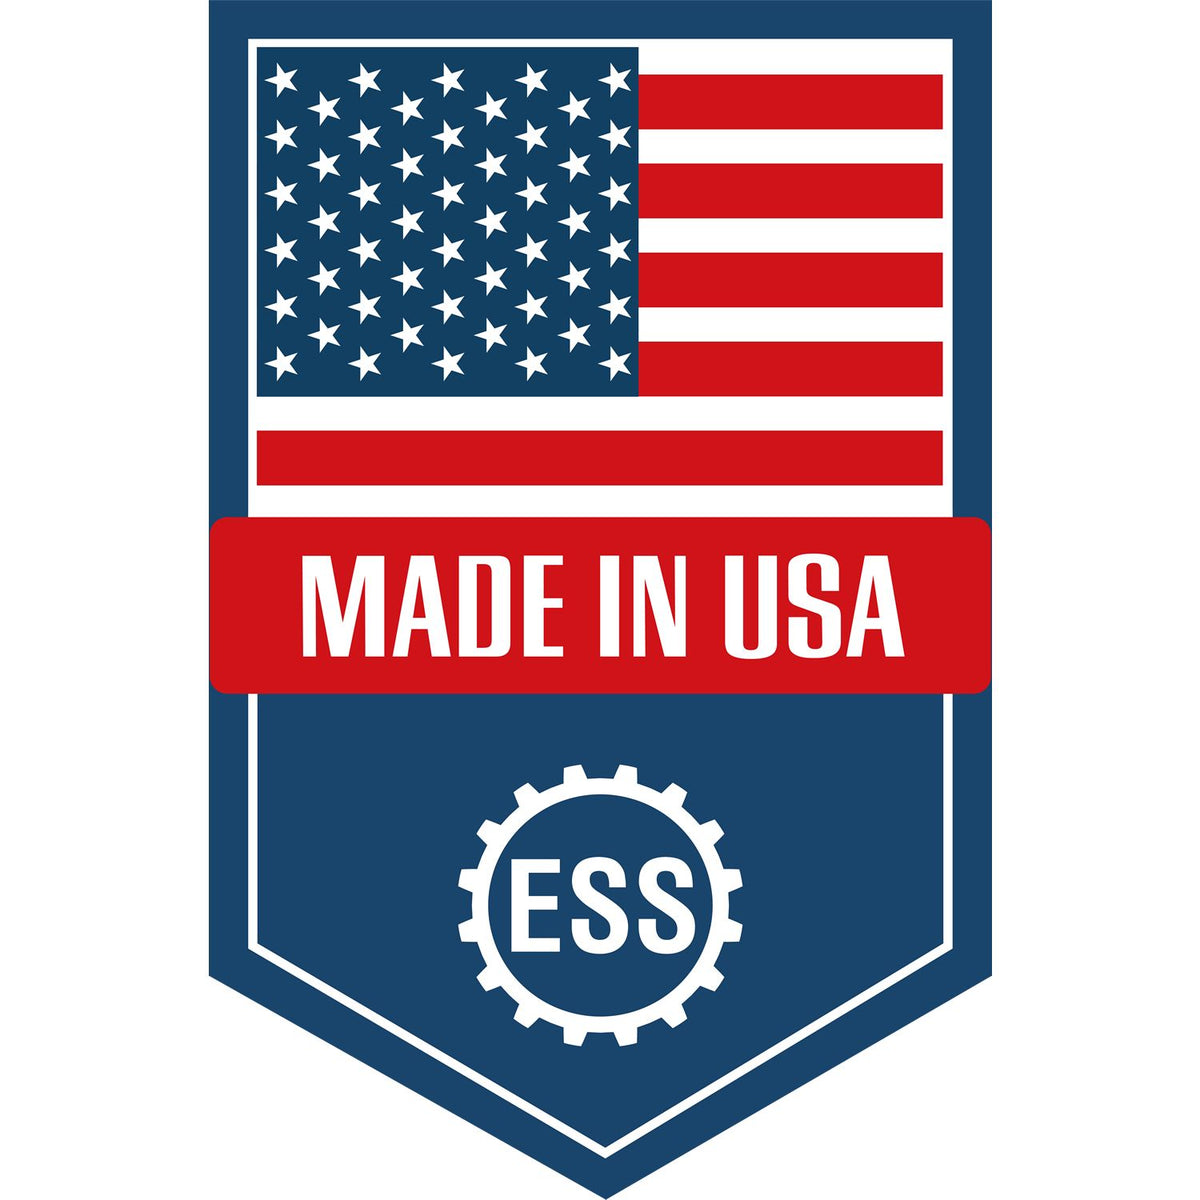 An icon or graphic with an American flag and text reading Made in USA for the Gift Texas Engineer Seal